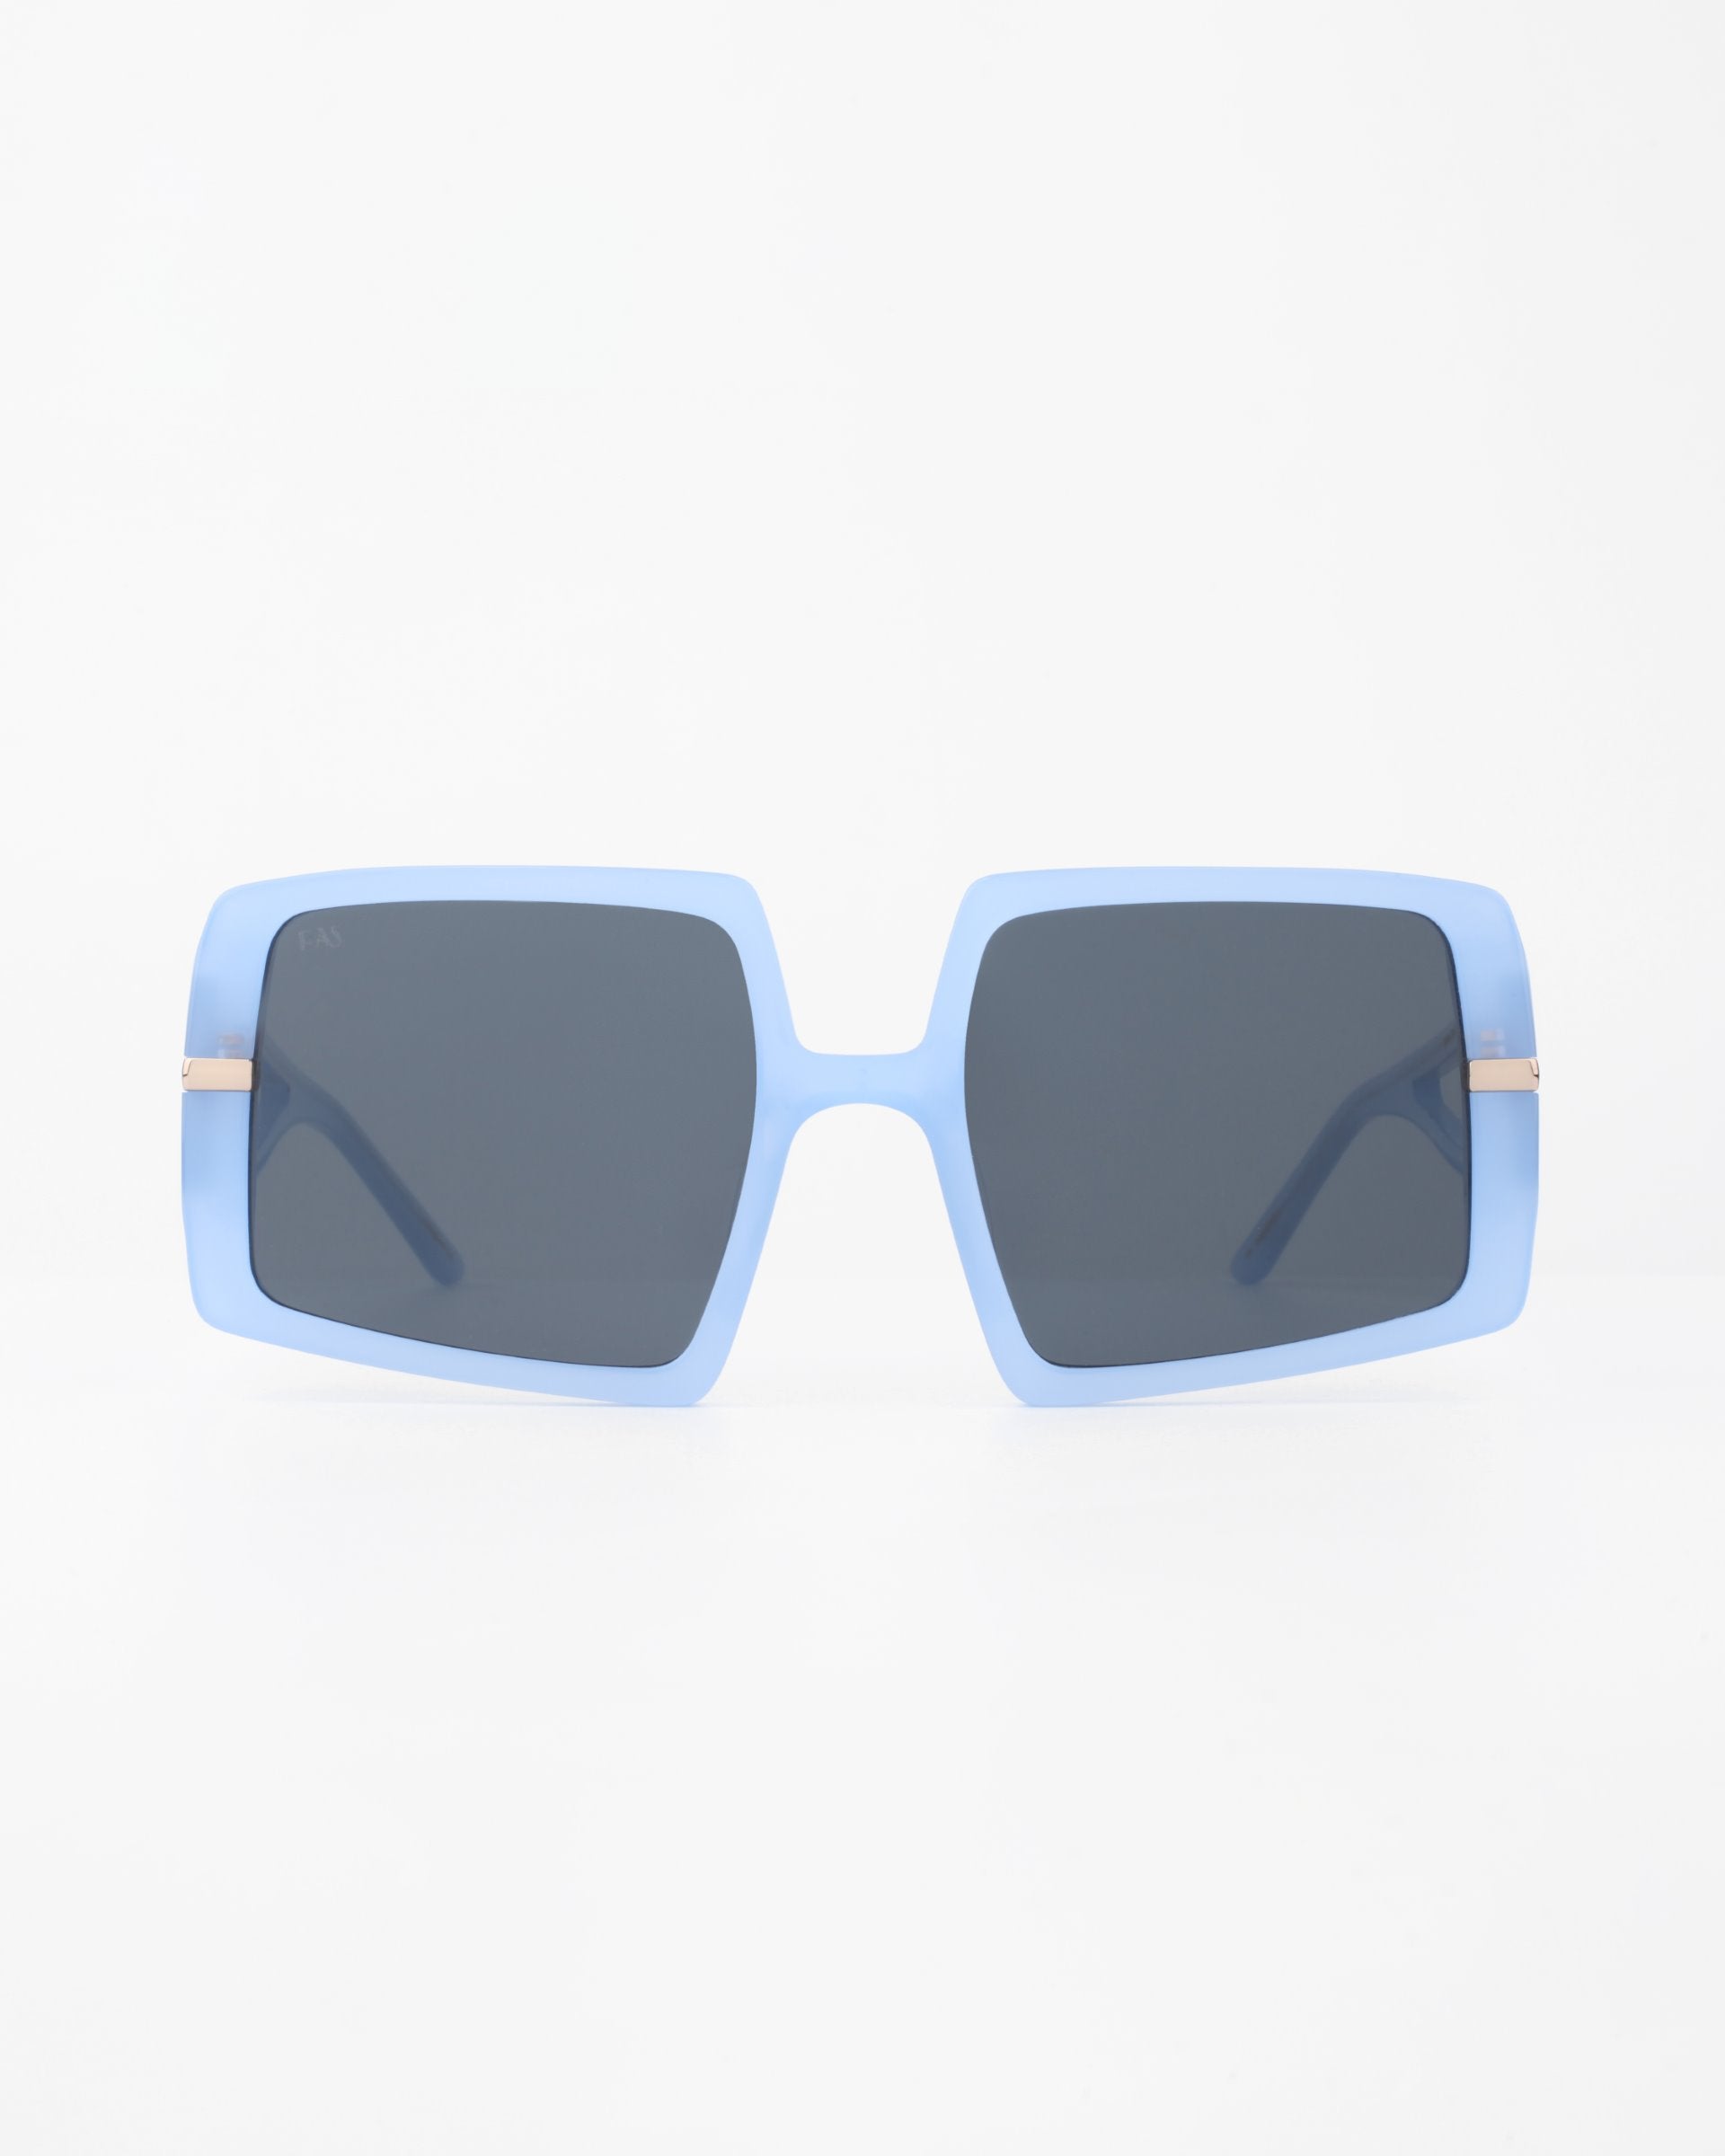 A pair of oversized rectangular For Art&#39;s Sake® Saturday sunglasses with light blue, plant-based acetate frames and dark, shatter-resistant nylon lenses positioned against a white background. The sunglasses have a bold, fashionable look with thick frames and slightly rounded edges.